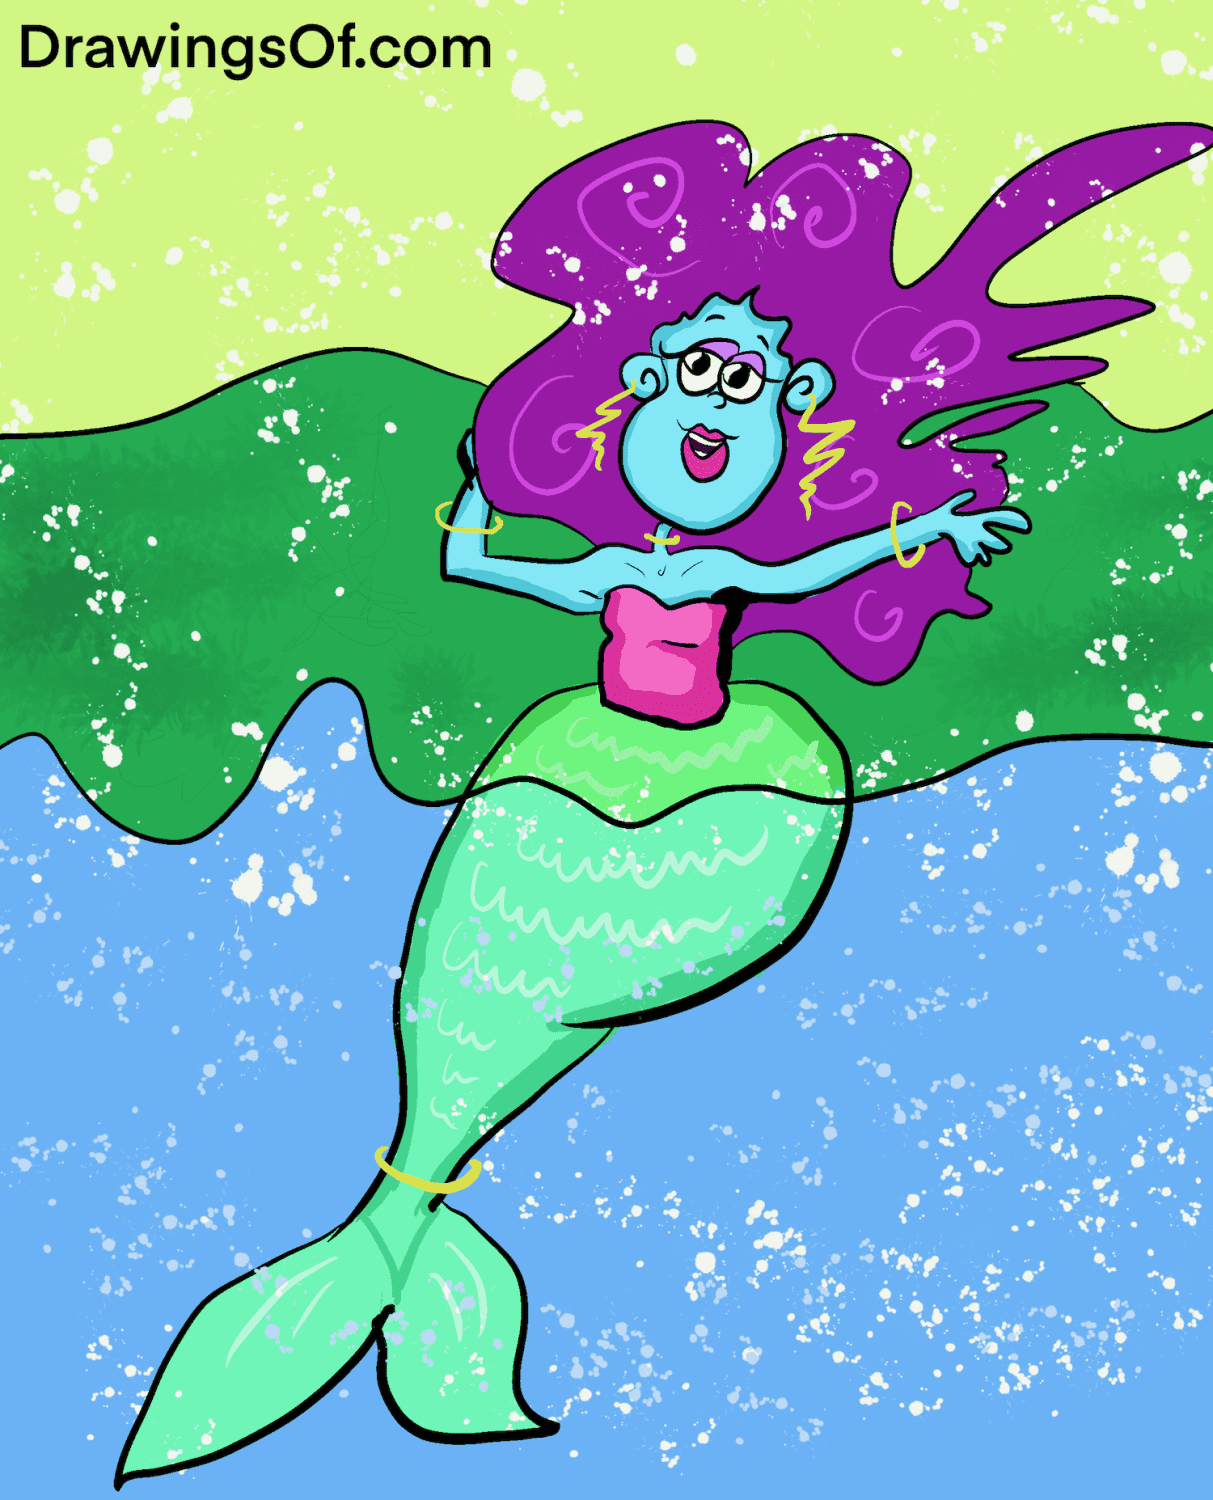 A quick and simple drawing of a mermaid tail.